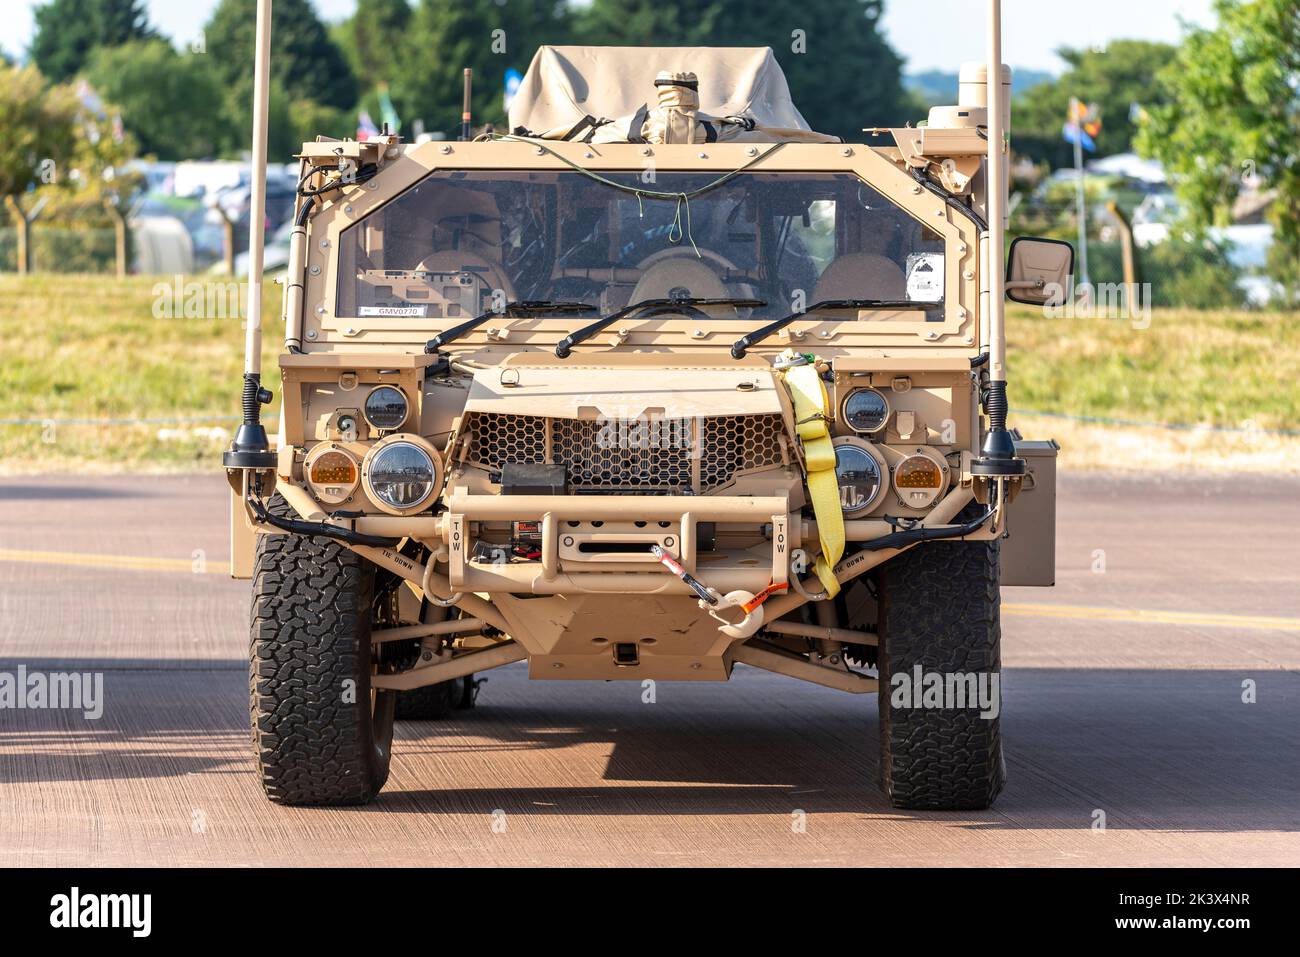 U.S. Special Operations Command M1288 GMV 1,1 US Military air transportable Combat Vehicle on Display at the Royal International Air Tattoo, UK Stockfoto